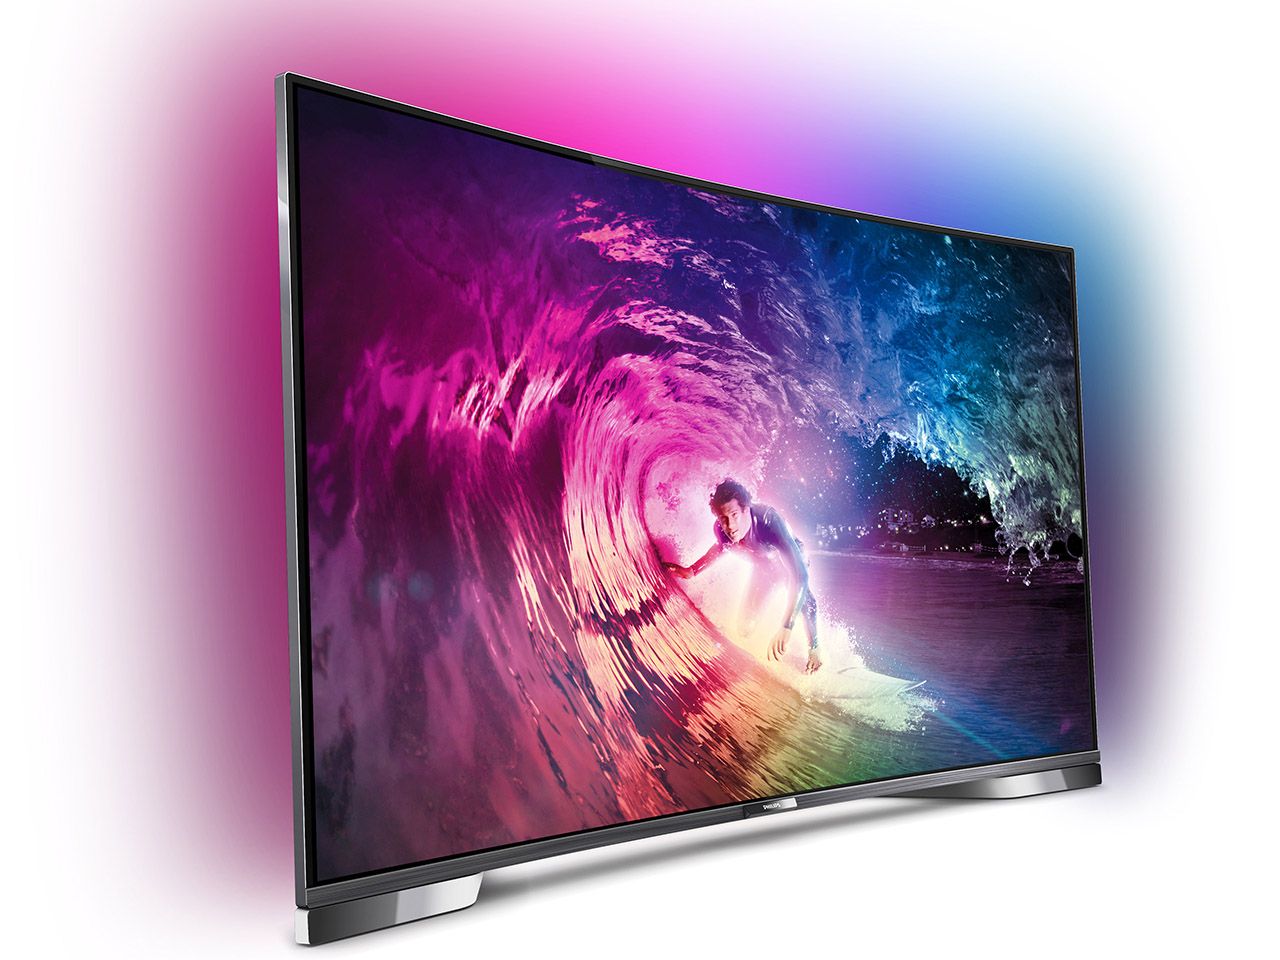 philips joins curved tv revolution with ultra hd 4k set of its own adds ambilight image 2